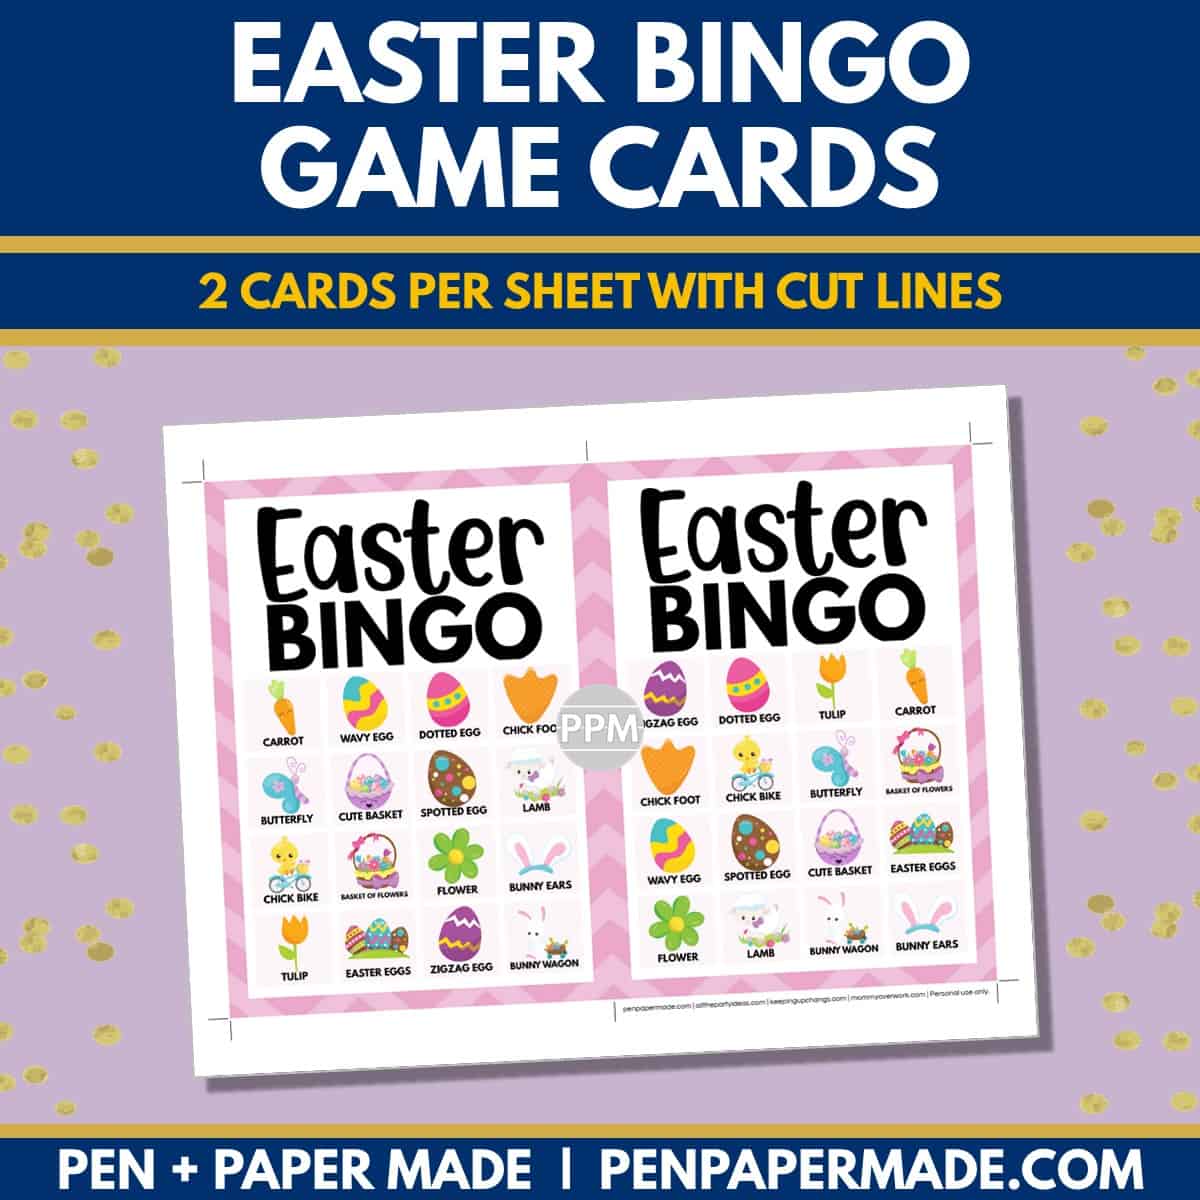 easter bingo card 4x4 5x7 game boards with images and text words.